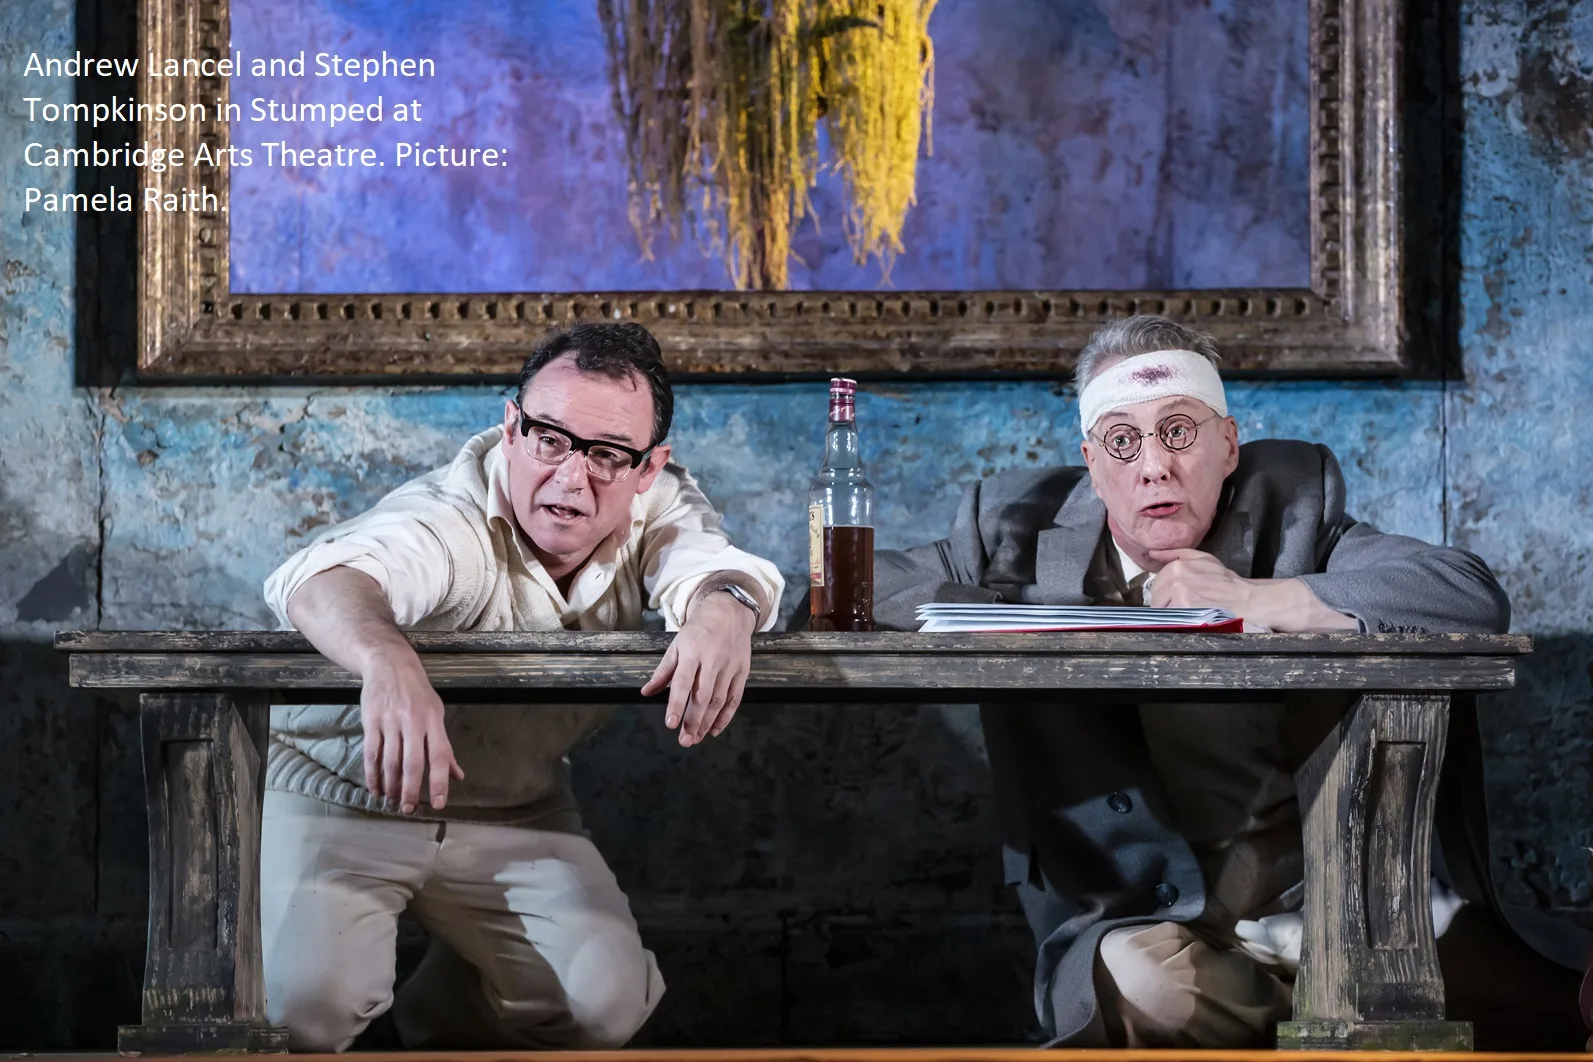 Stumped is at Cambridge Arts Theatre until Saturday, June 10 and then at Hampstead Theatre in London from June 16 to July 22. PHOTO: Pamela Raith Photography